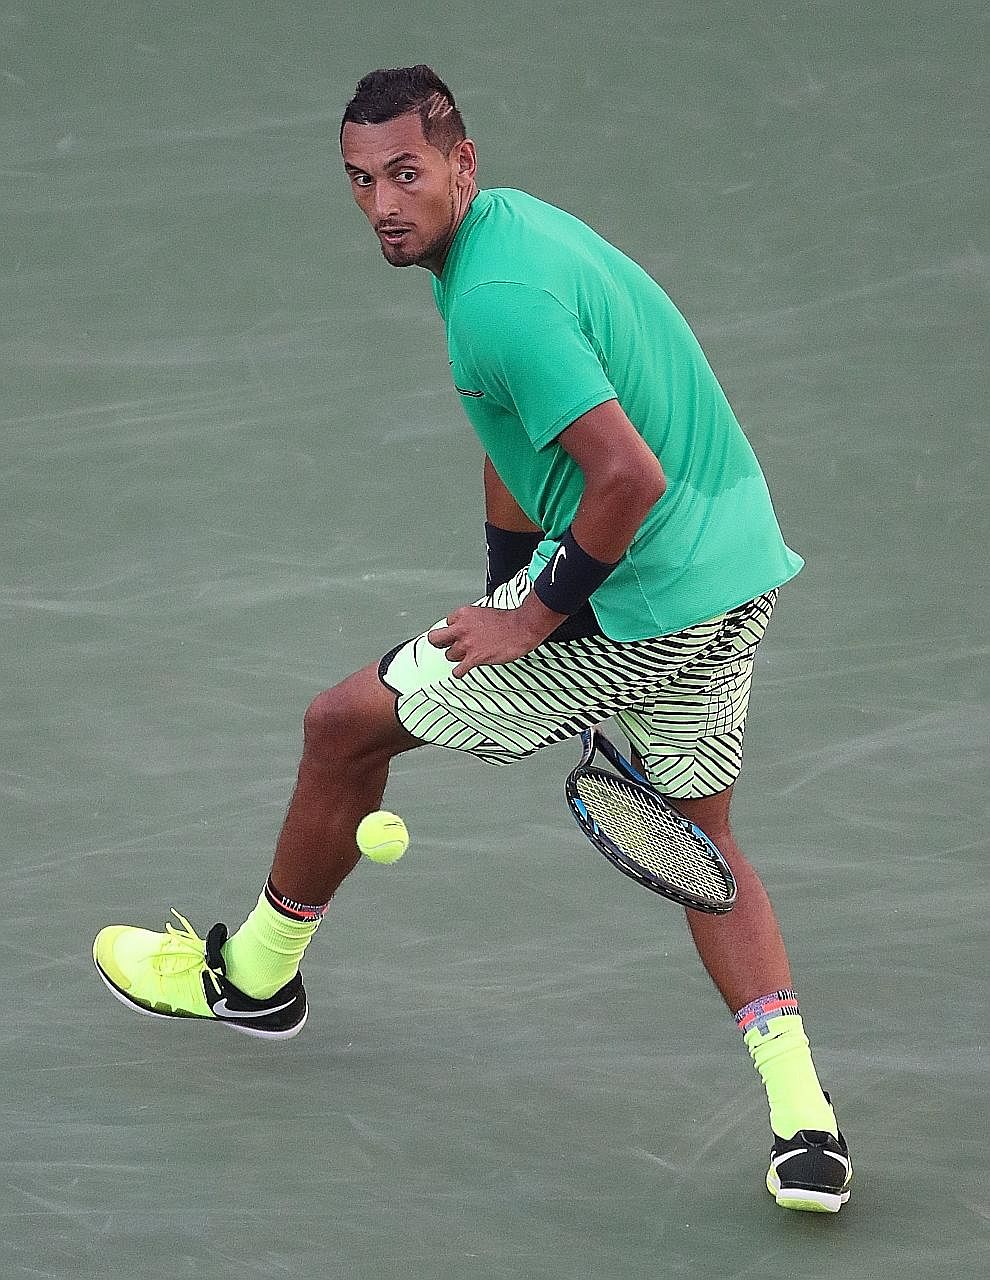 Nick Kyrgios hitting a "tweener", or a return between his legs, on the way to a 6-4, 7-6 (7-3) win against Novak Djokovic at the Indian Wells Masters on Wednesday. The Serb was bidding for a fourth straight title in the Californian desert, but fell t